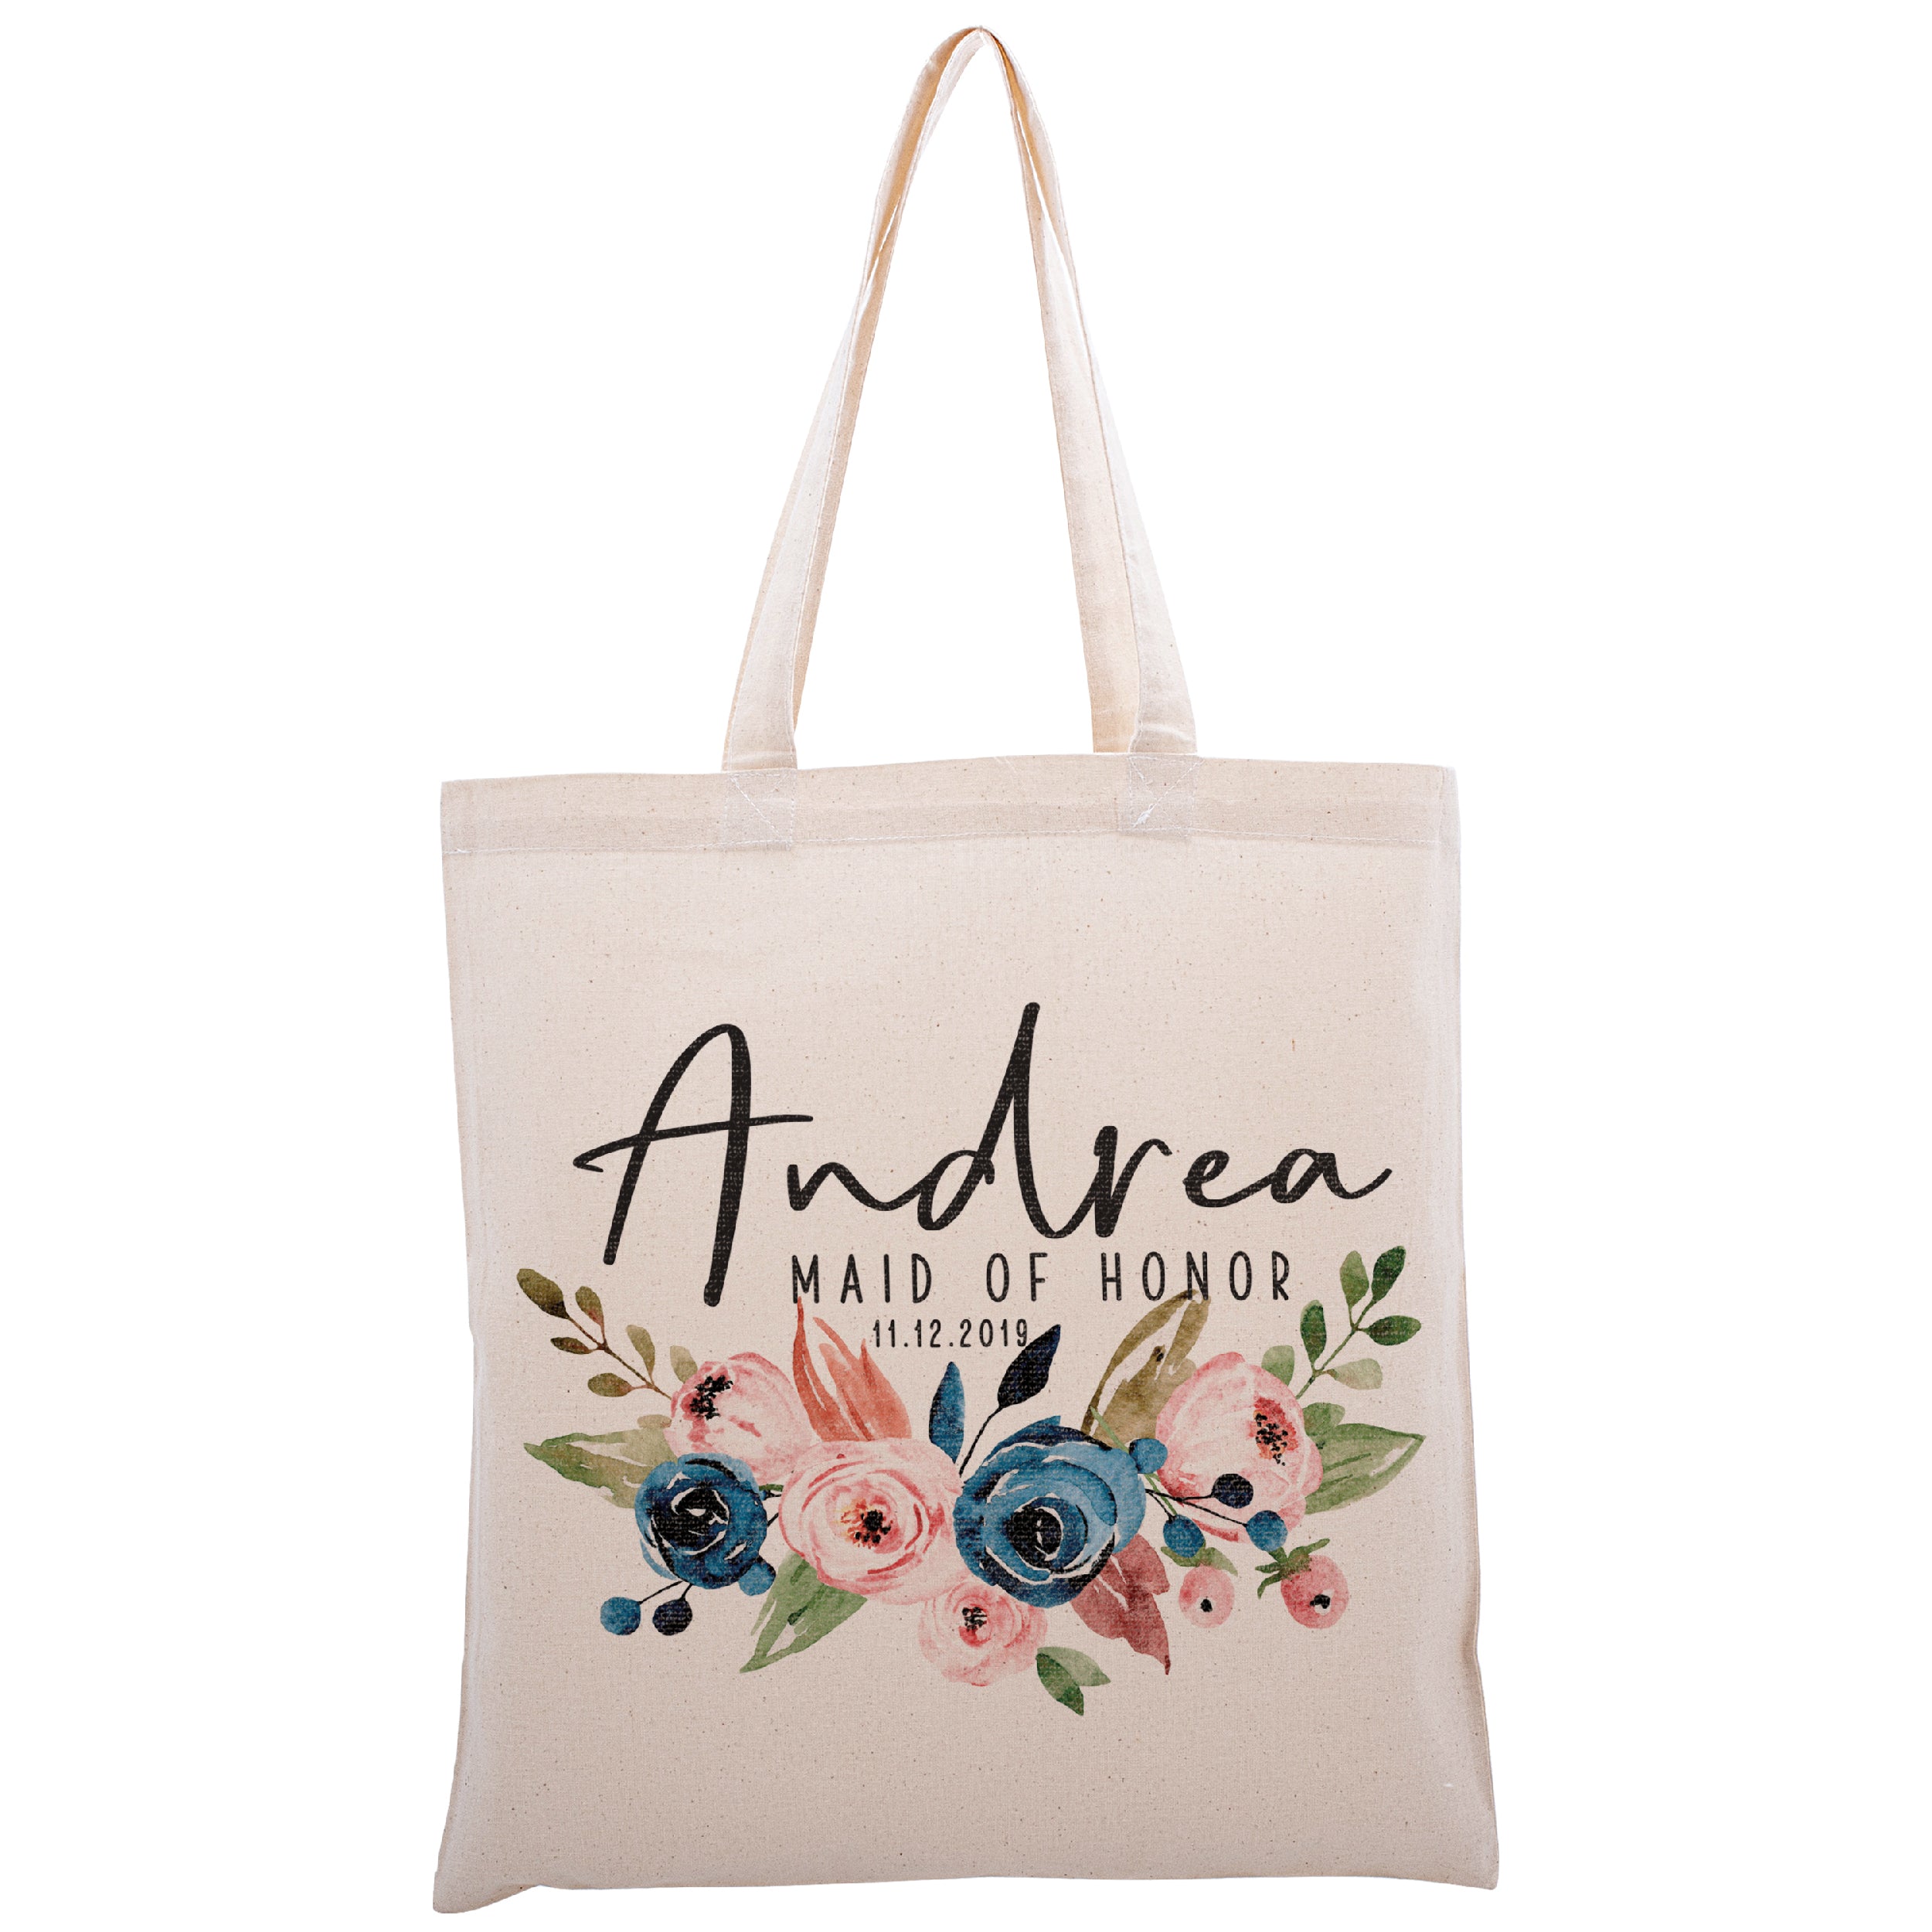 Monogram Tote Bag with 100% Cotton Canvas and a Chic Personalized